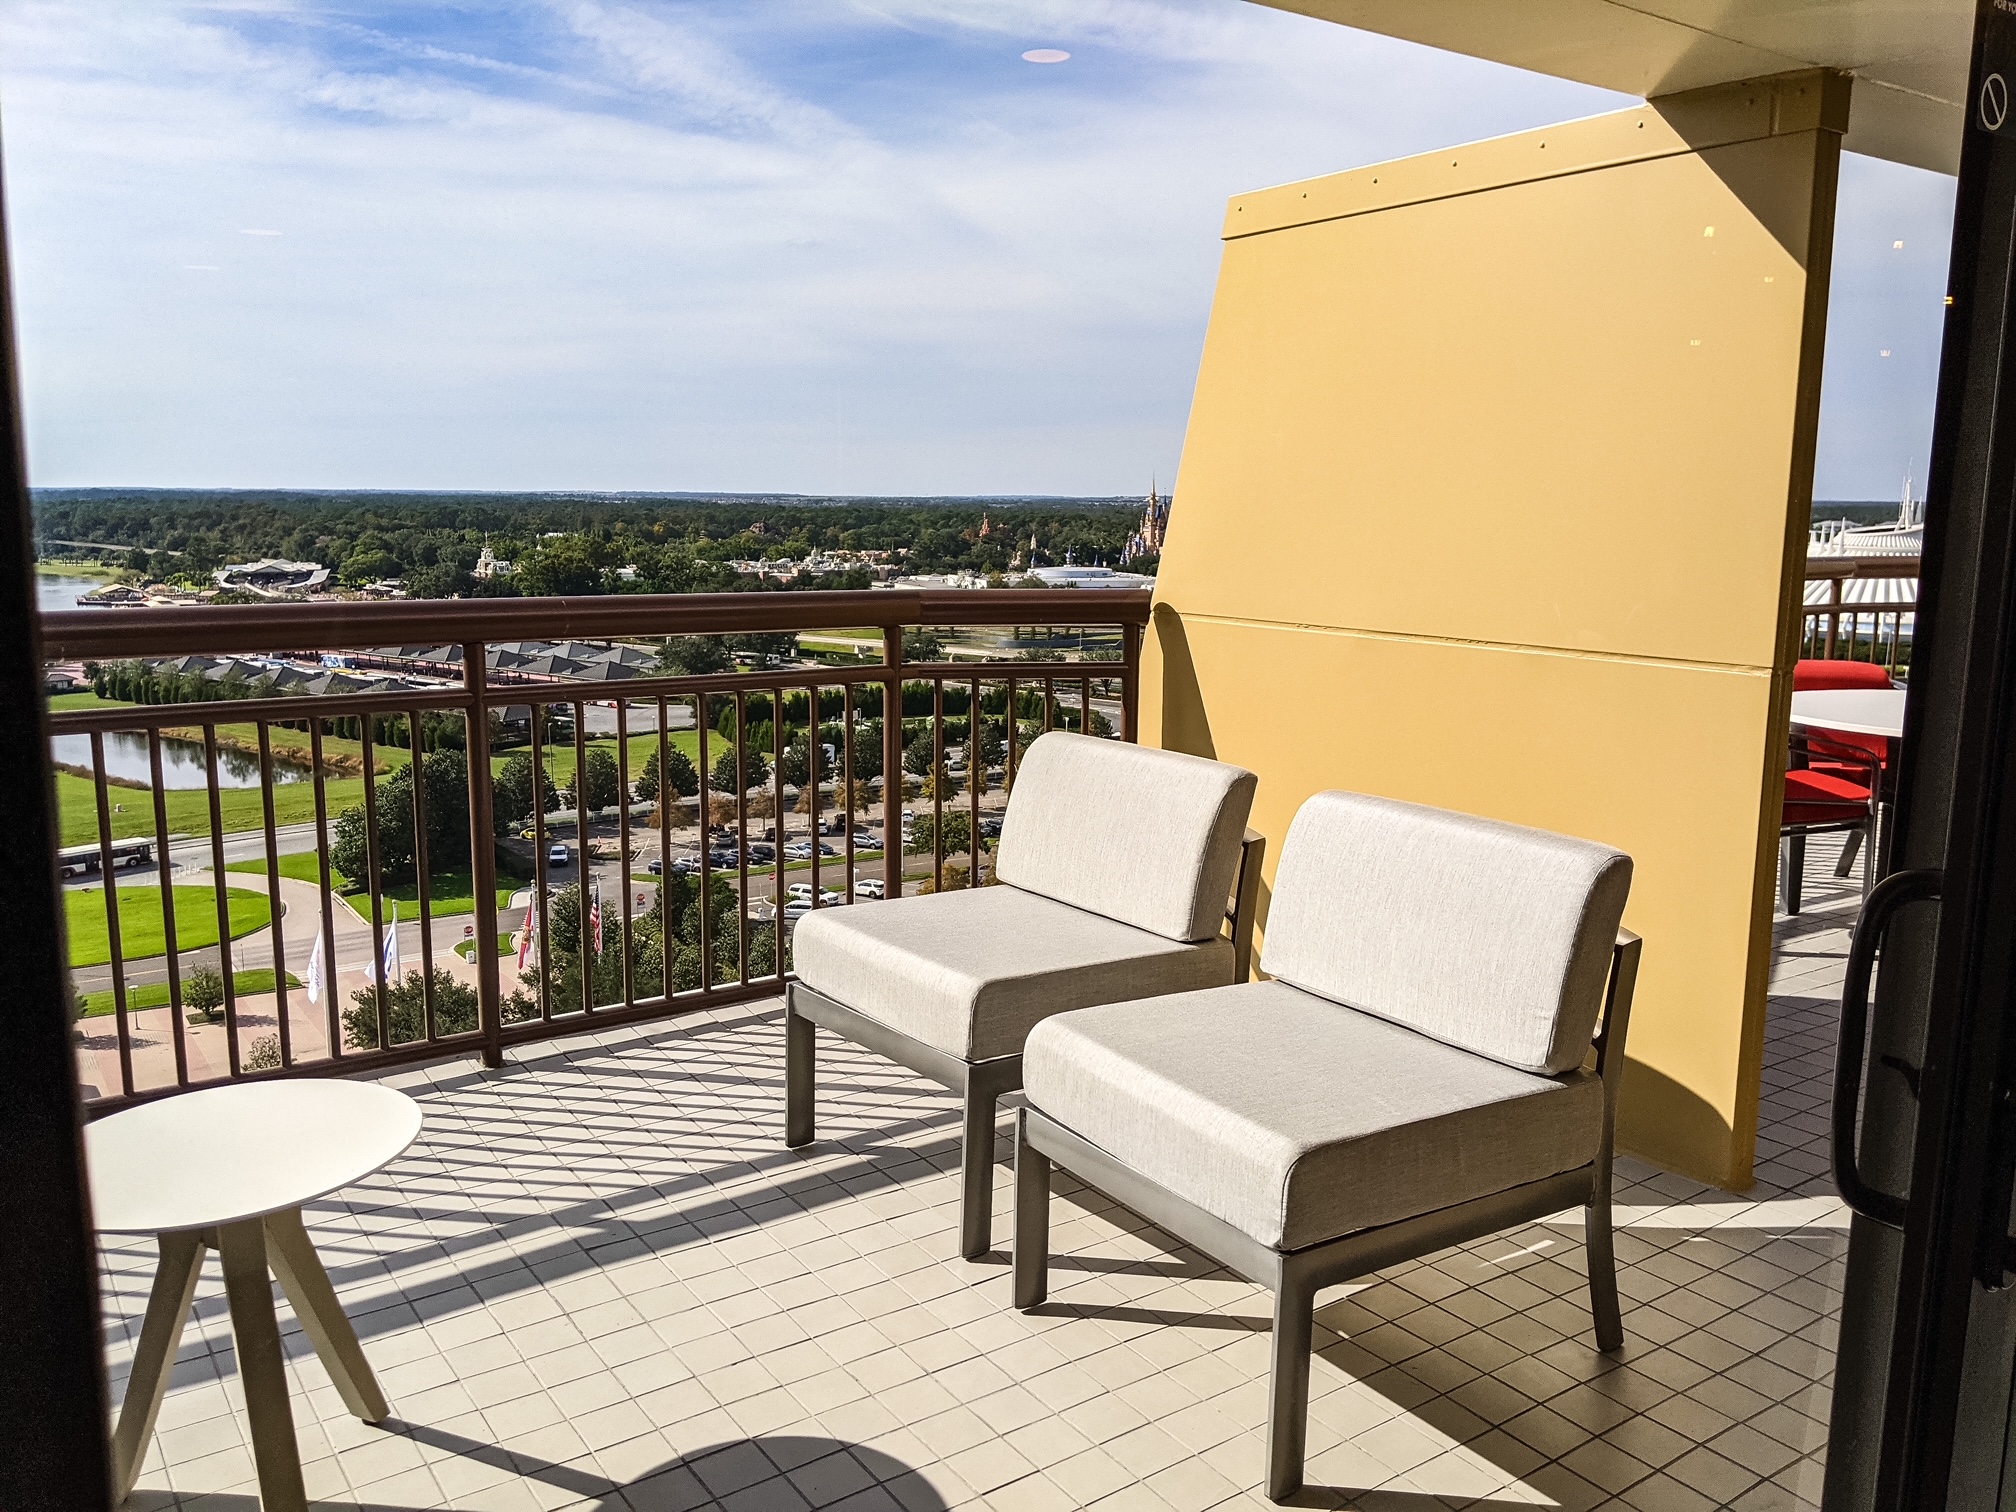 Presidential Suite at Contemporary Resort – Balcony | Wish Upon a Star ...